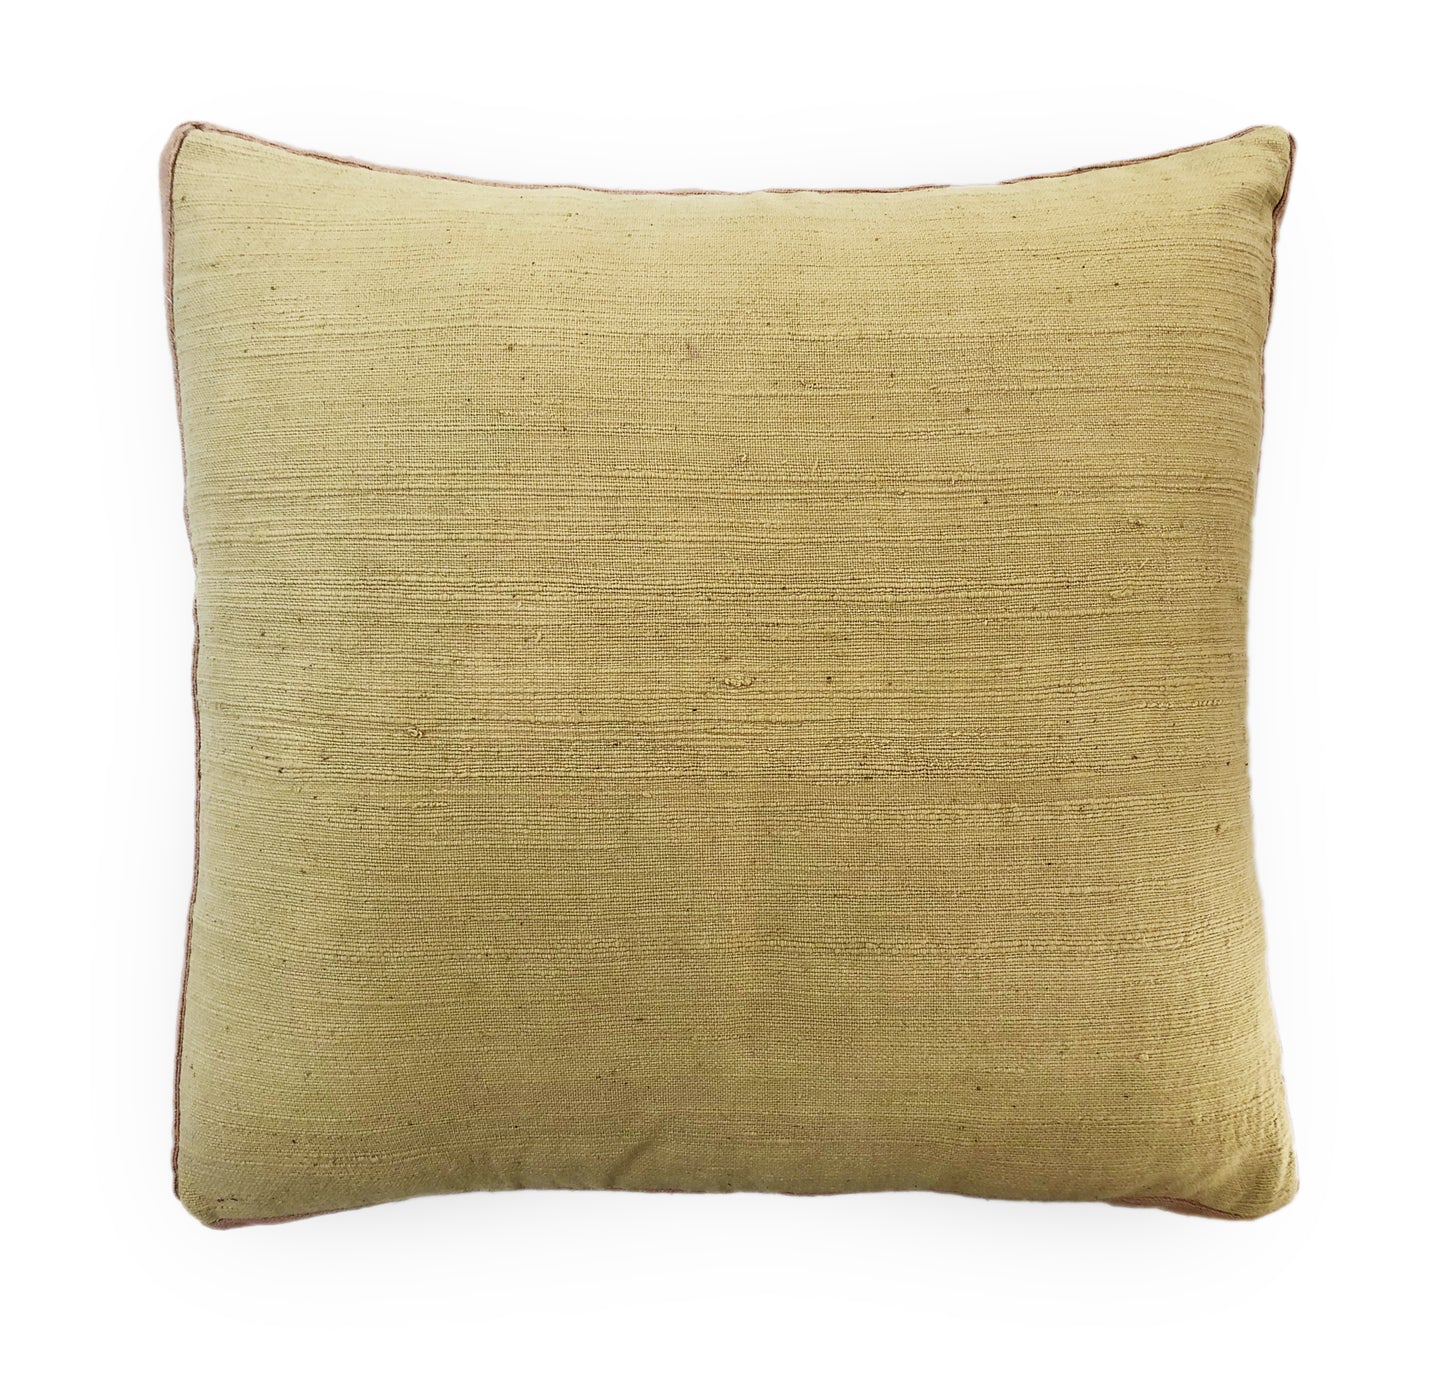 Mustard & Himalayan Contour Line Pillow Cover 18x18in